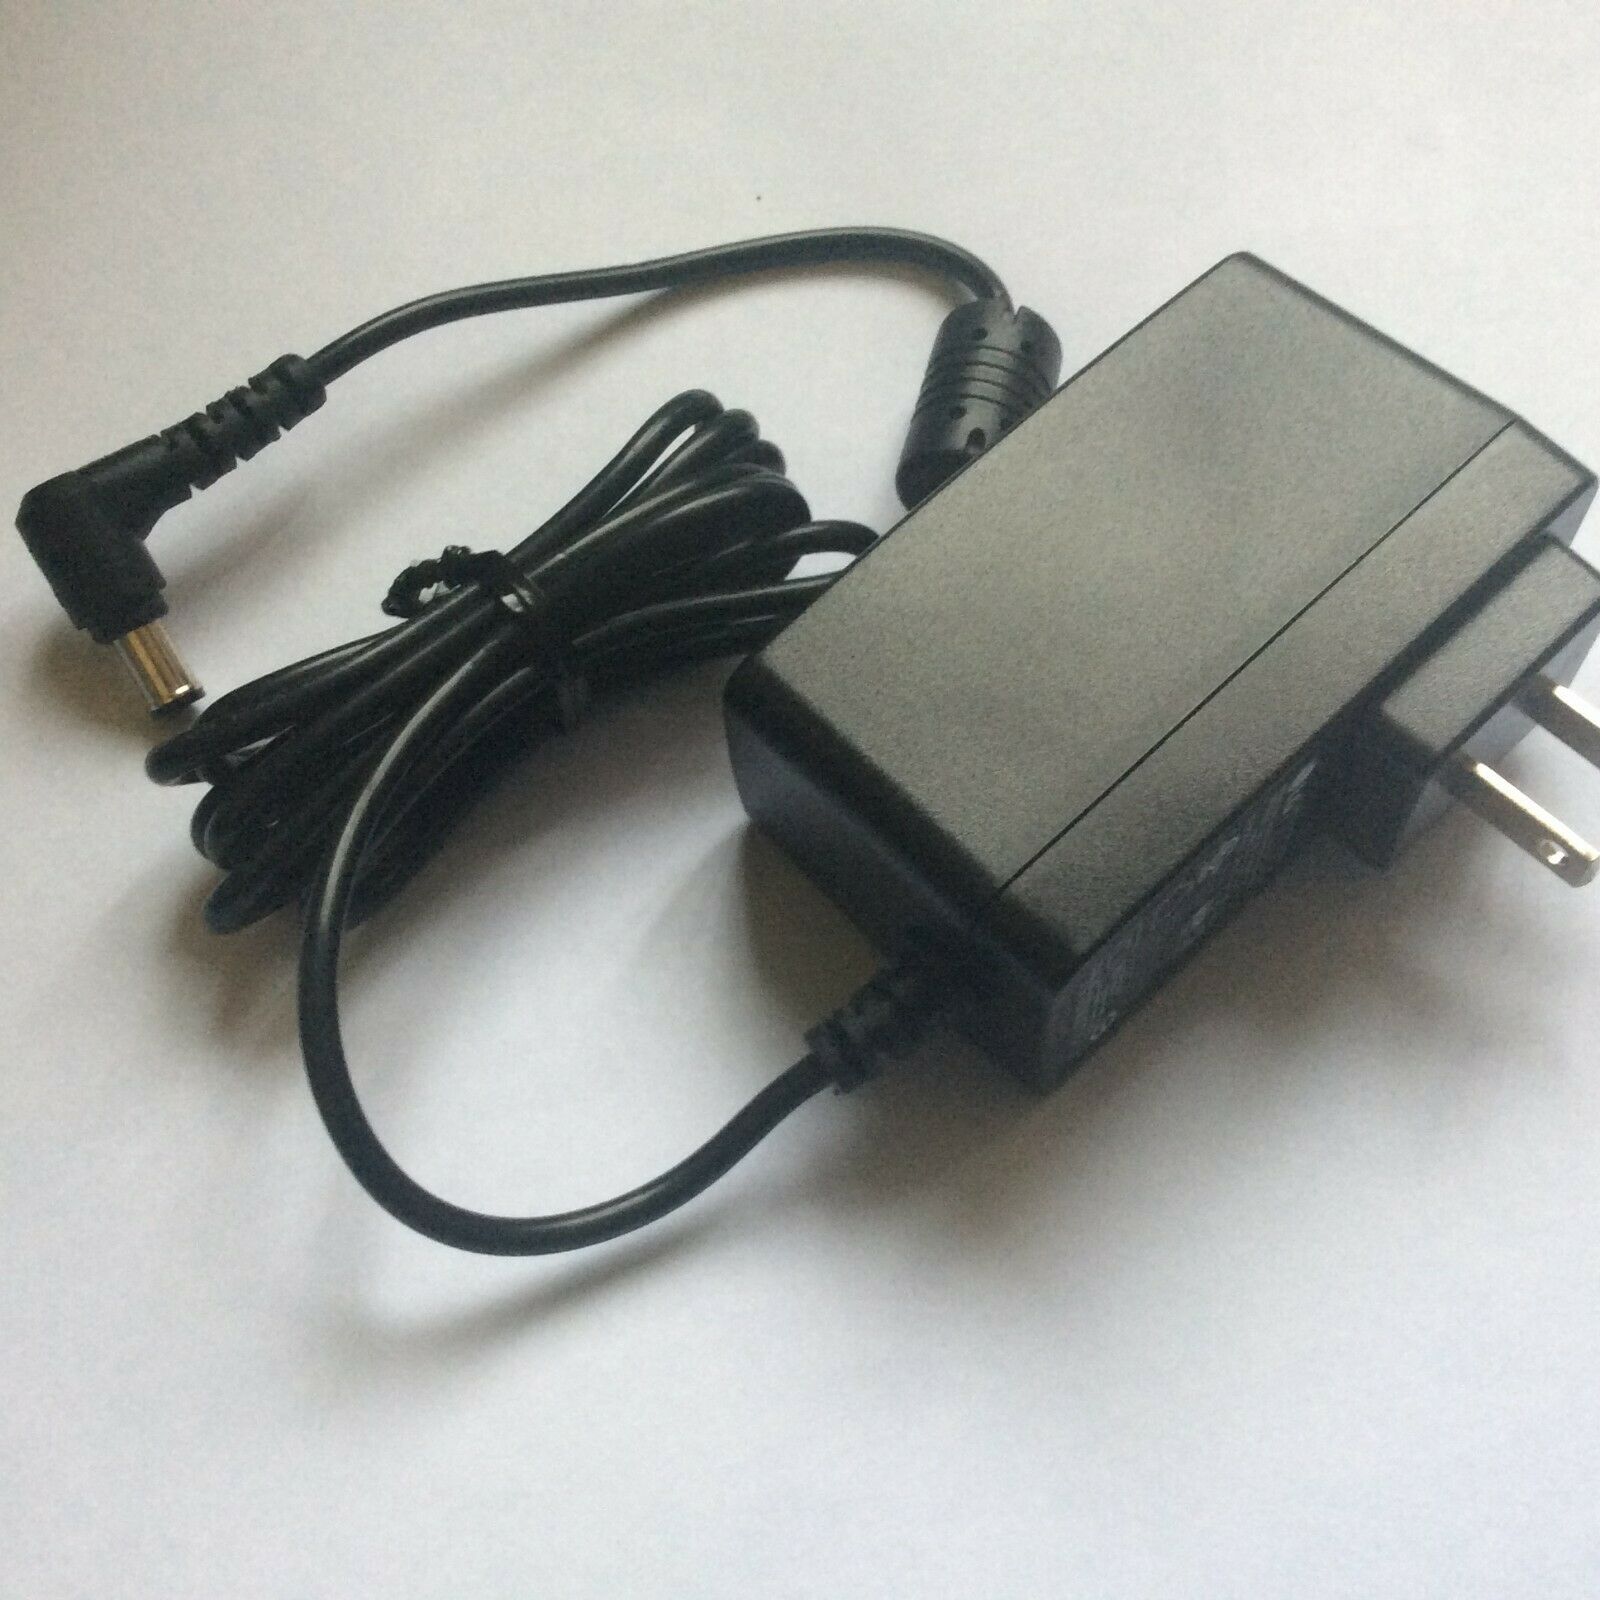 FOR 3Com US Robotics Print Server AC ADAPTER CHARGER DC replace SUPPLY CORD Brand: T Power Type: AC/DC adapter Wall